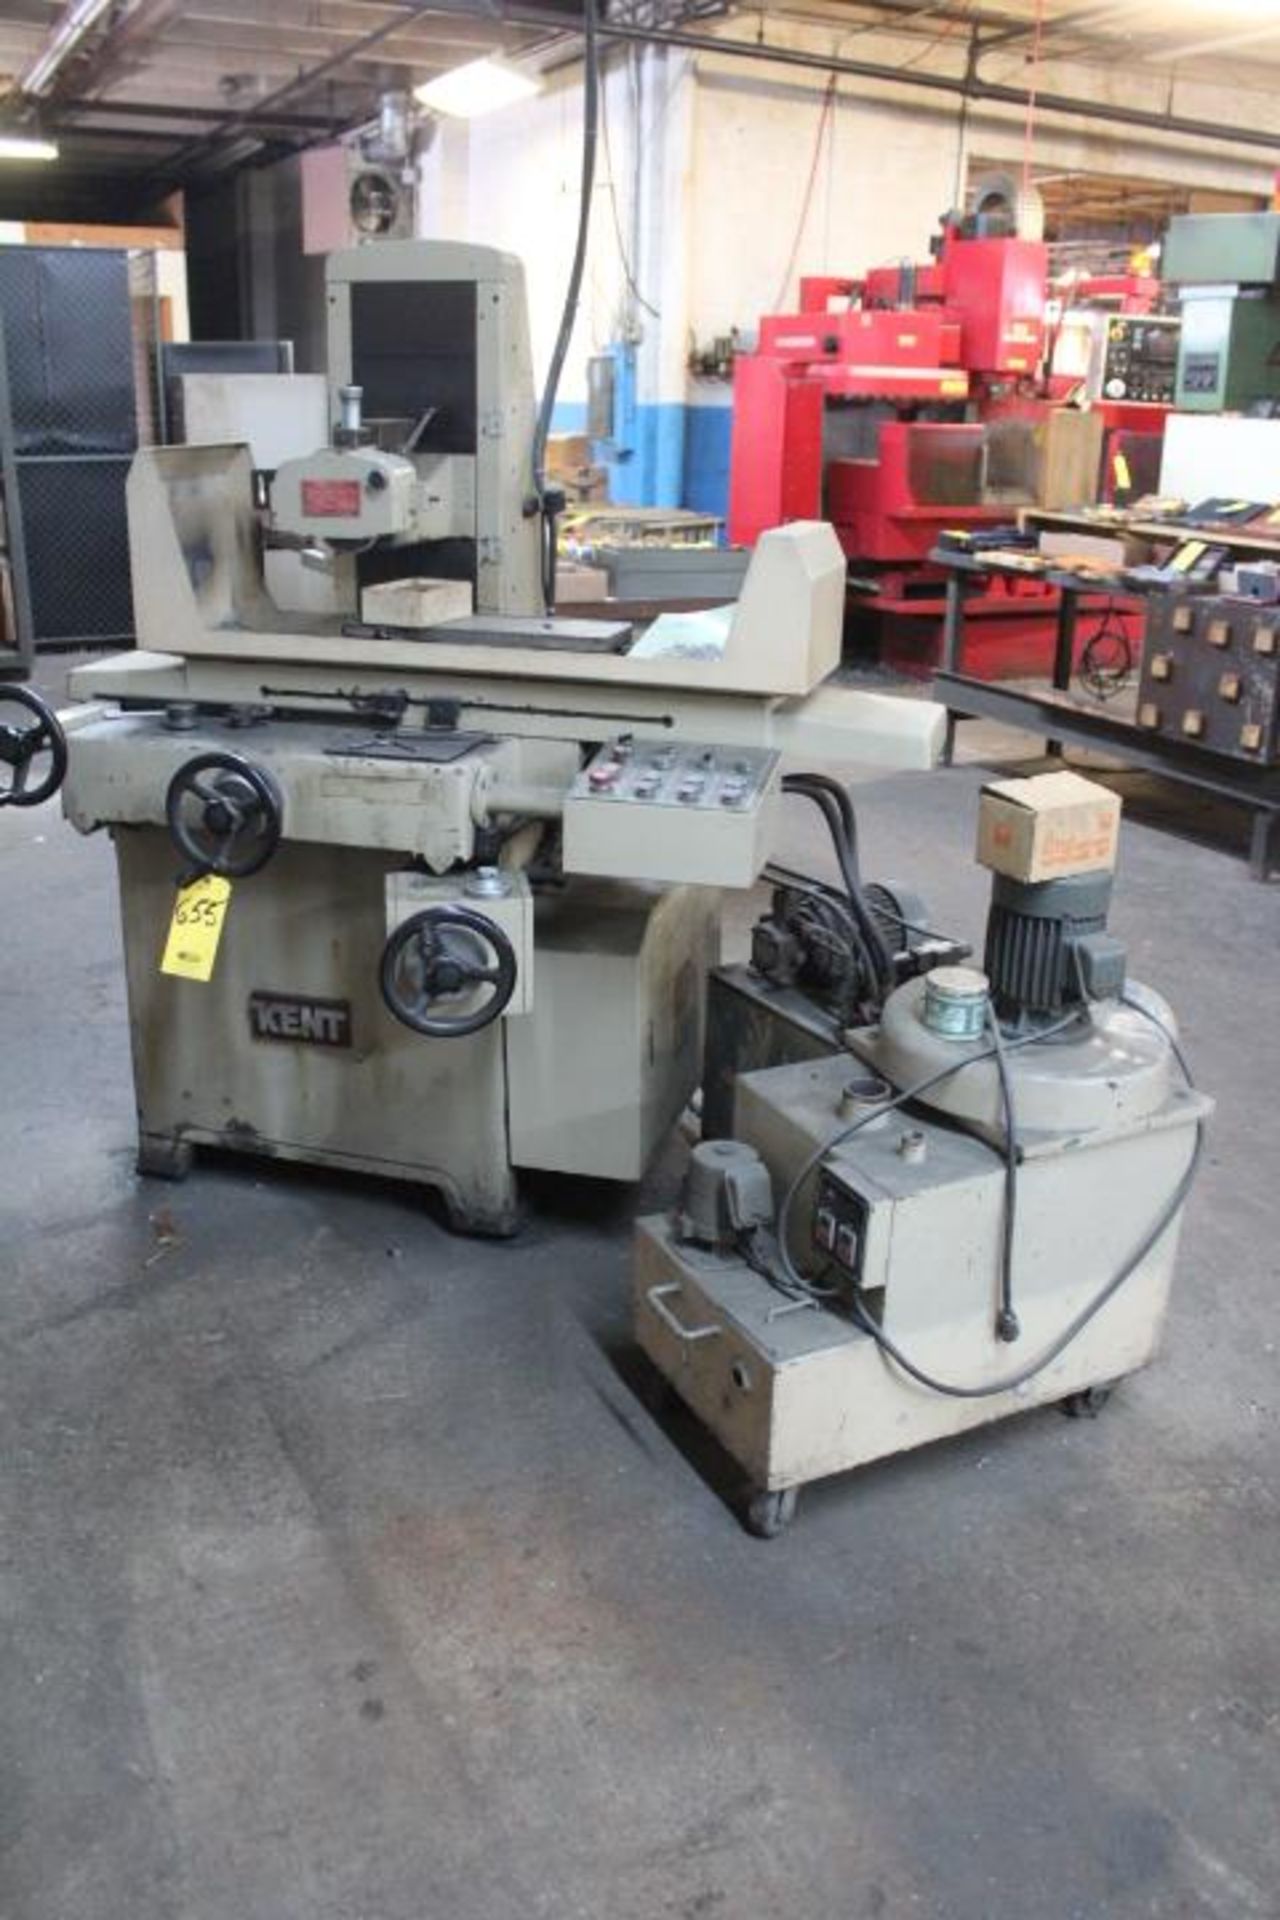 KENT CGS-250AHD AUTO HYDRAULIC SURFACE GRINDER, S/N 85050406, INCREMENTAL DOWN FEED, 6 IN. X 18 IN.